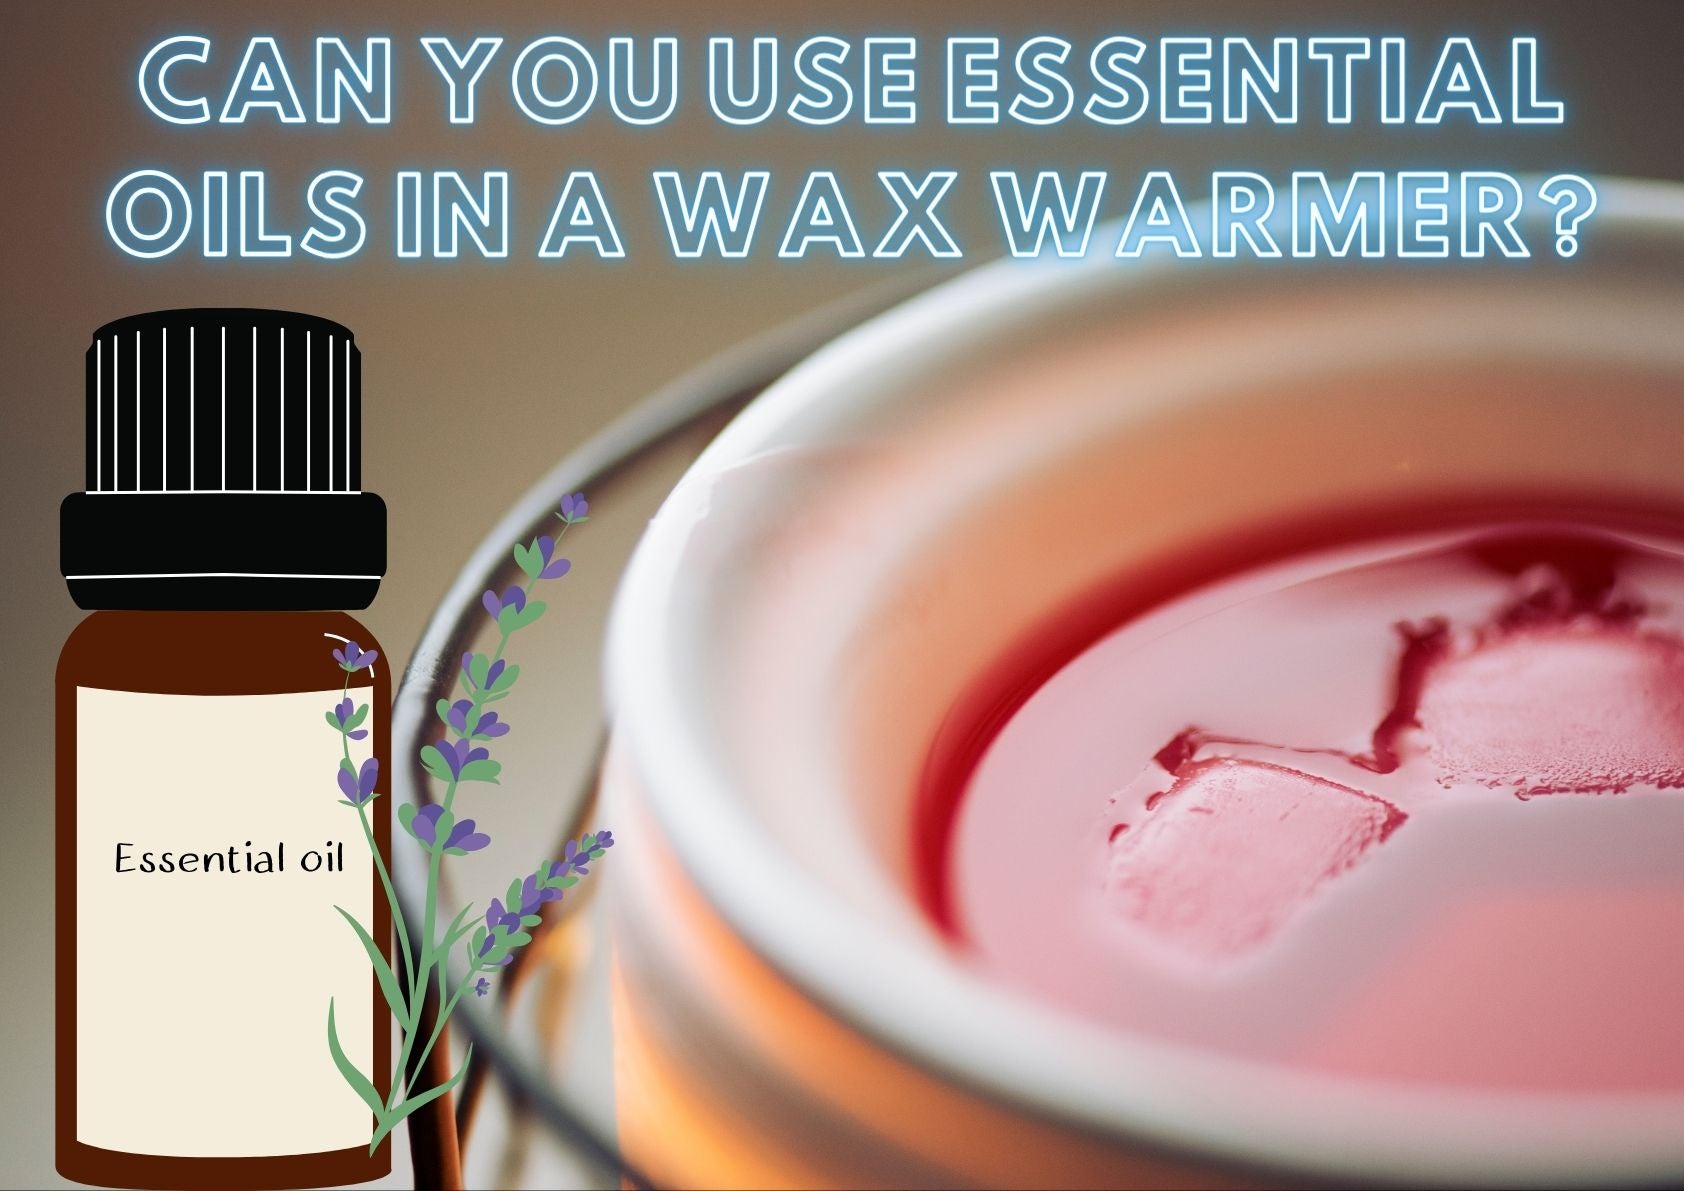 Can you use essential oils in a wax warmer?